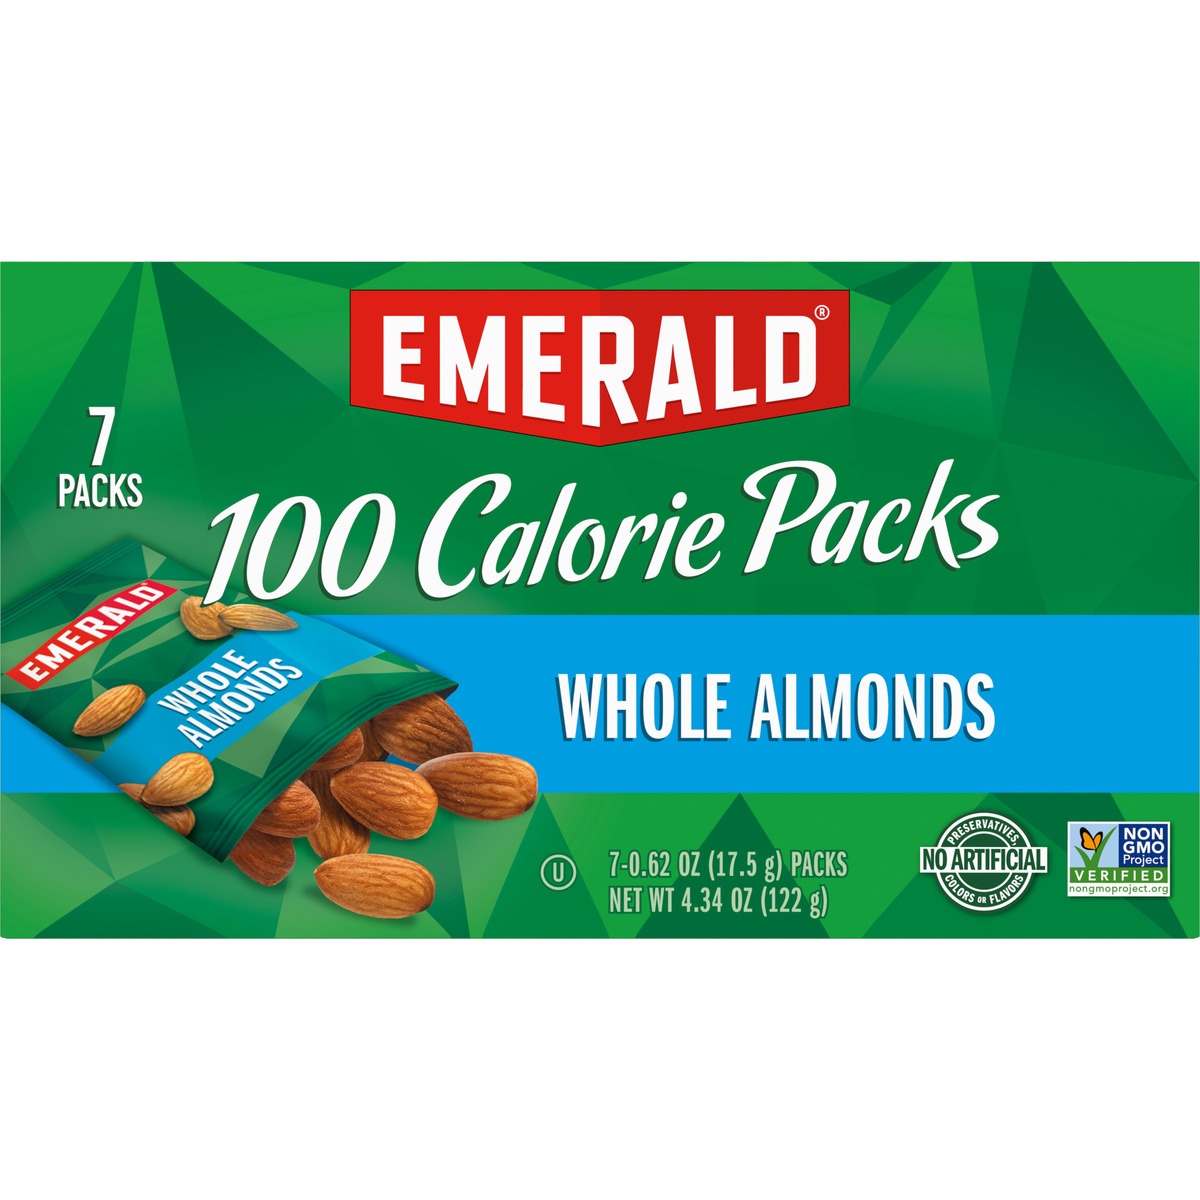 slide 10 of 11, Emerald Natural Almonds 100 Calorie Packs, 7 ct